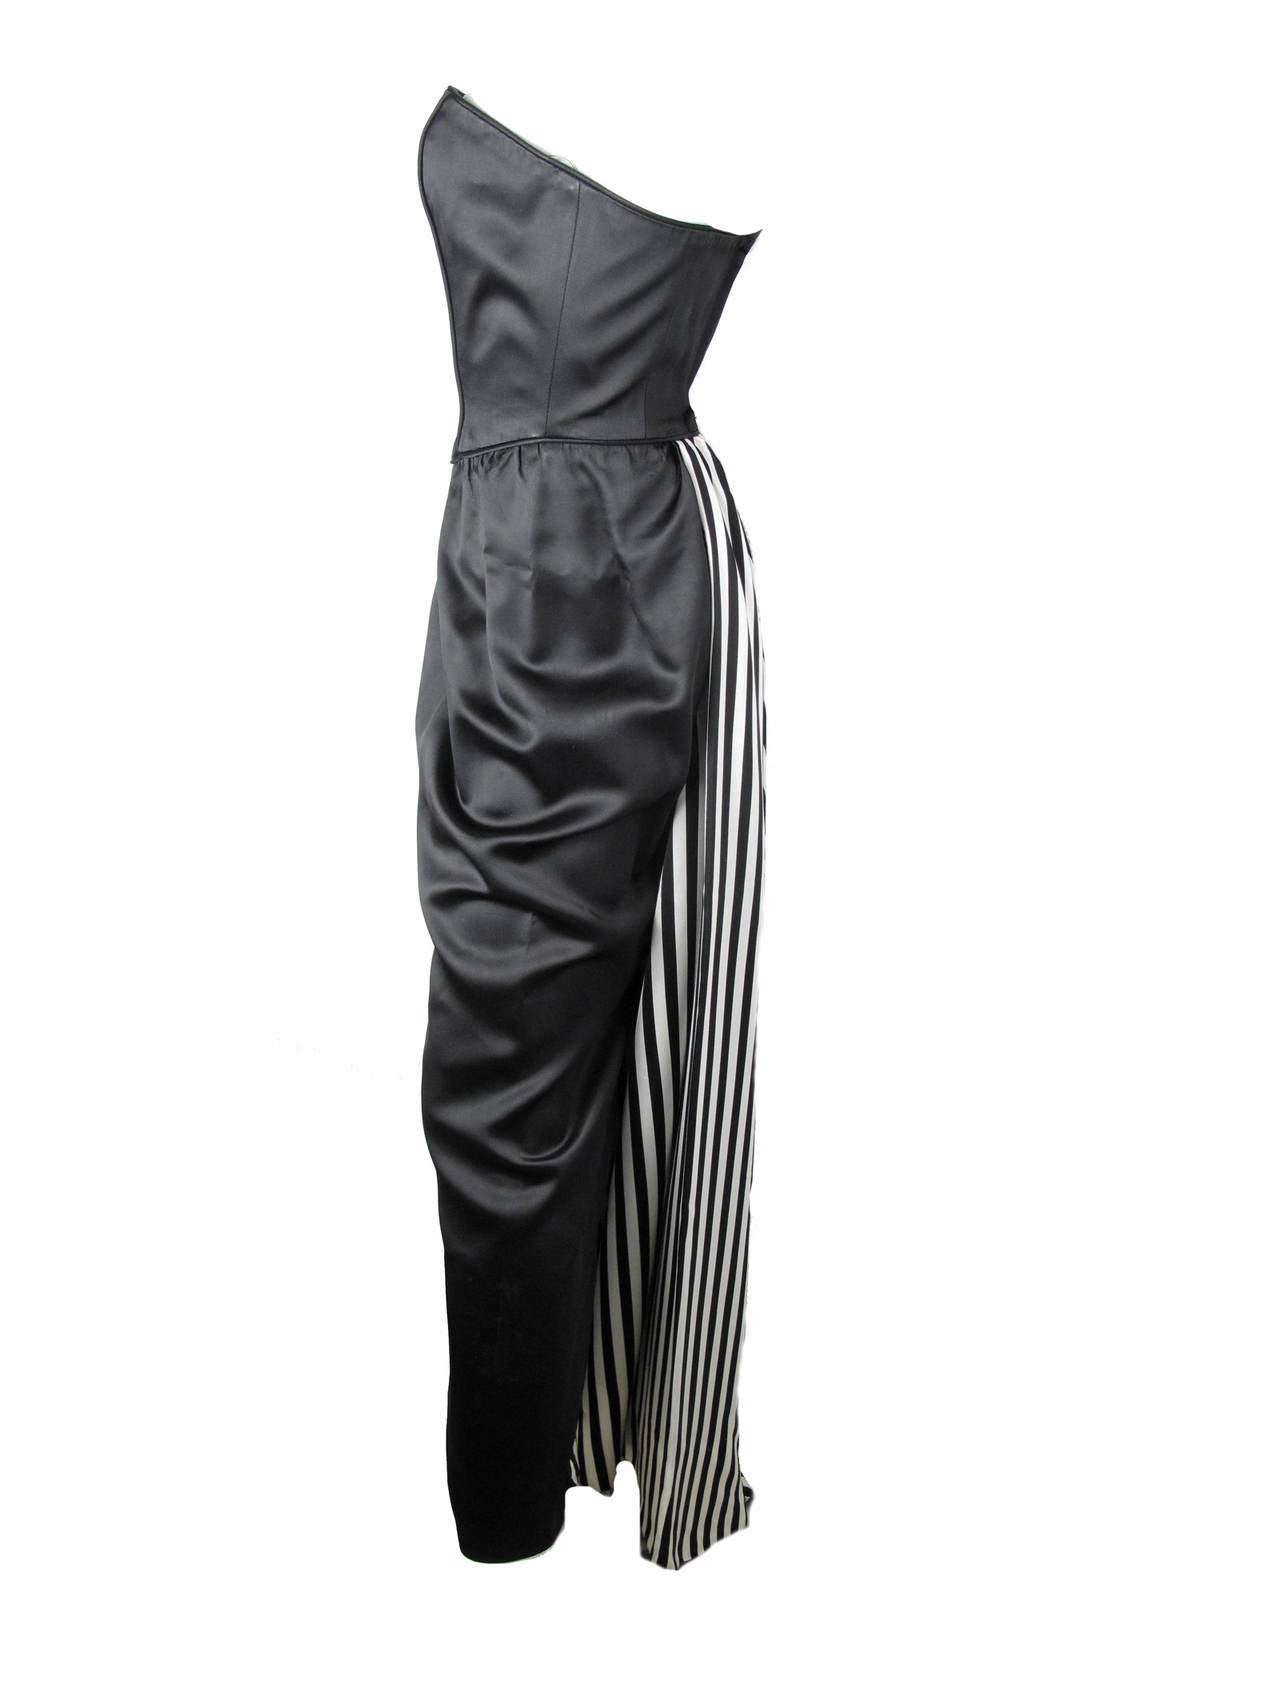 1980s Roland Klein black strapless dress with black and white train. Acetate fabric. 34